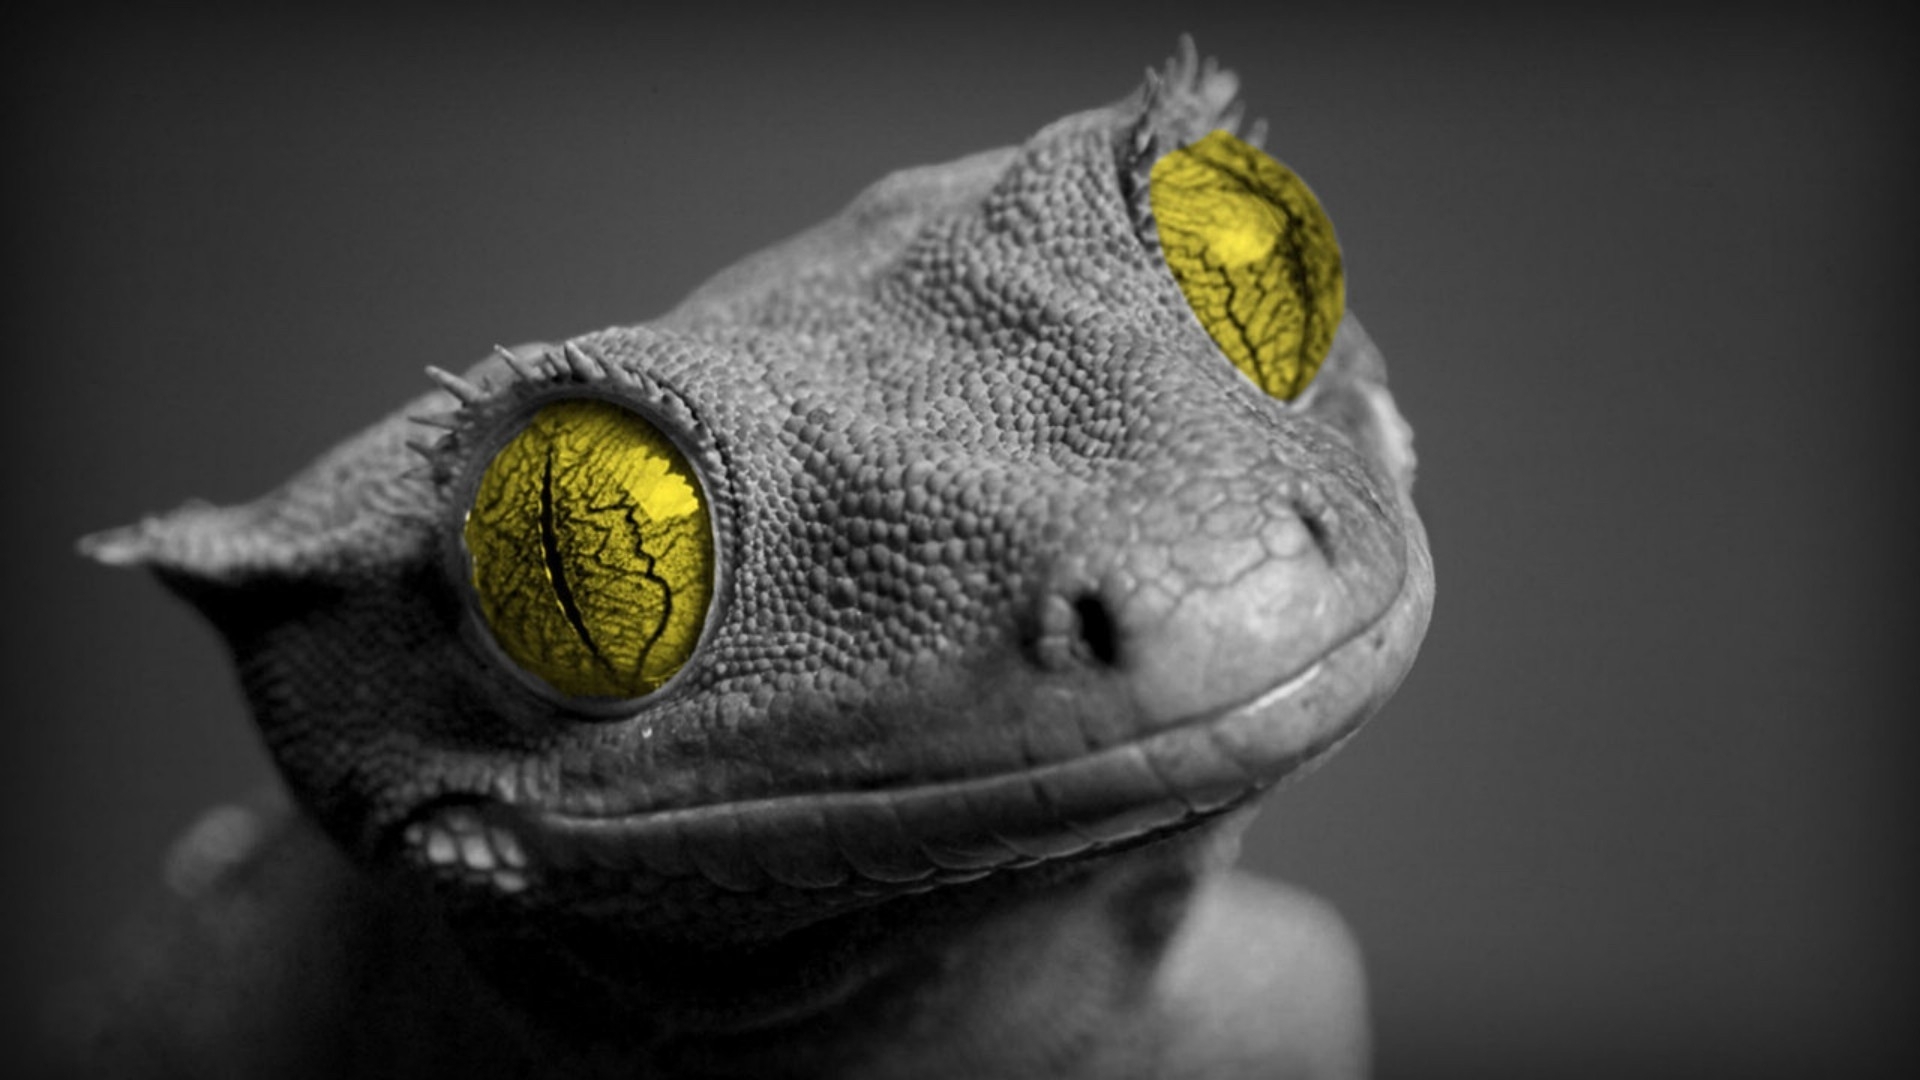 gecko, animal, reptiles images